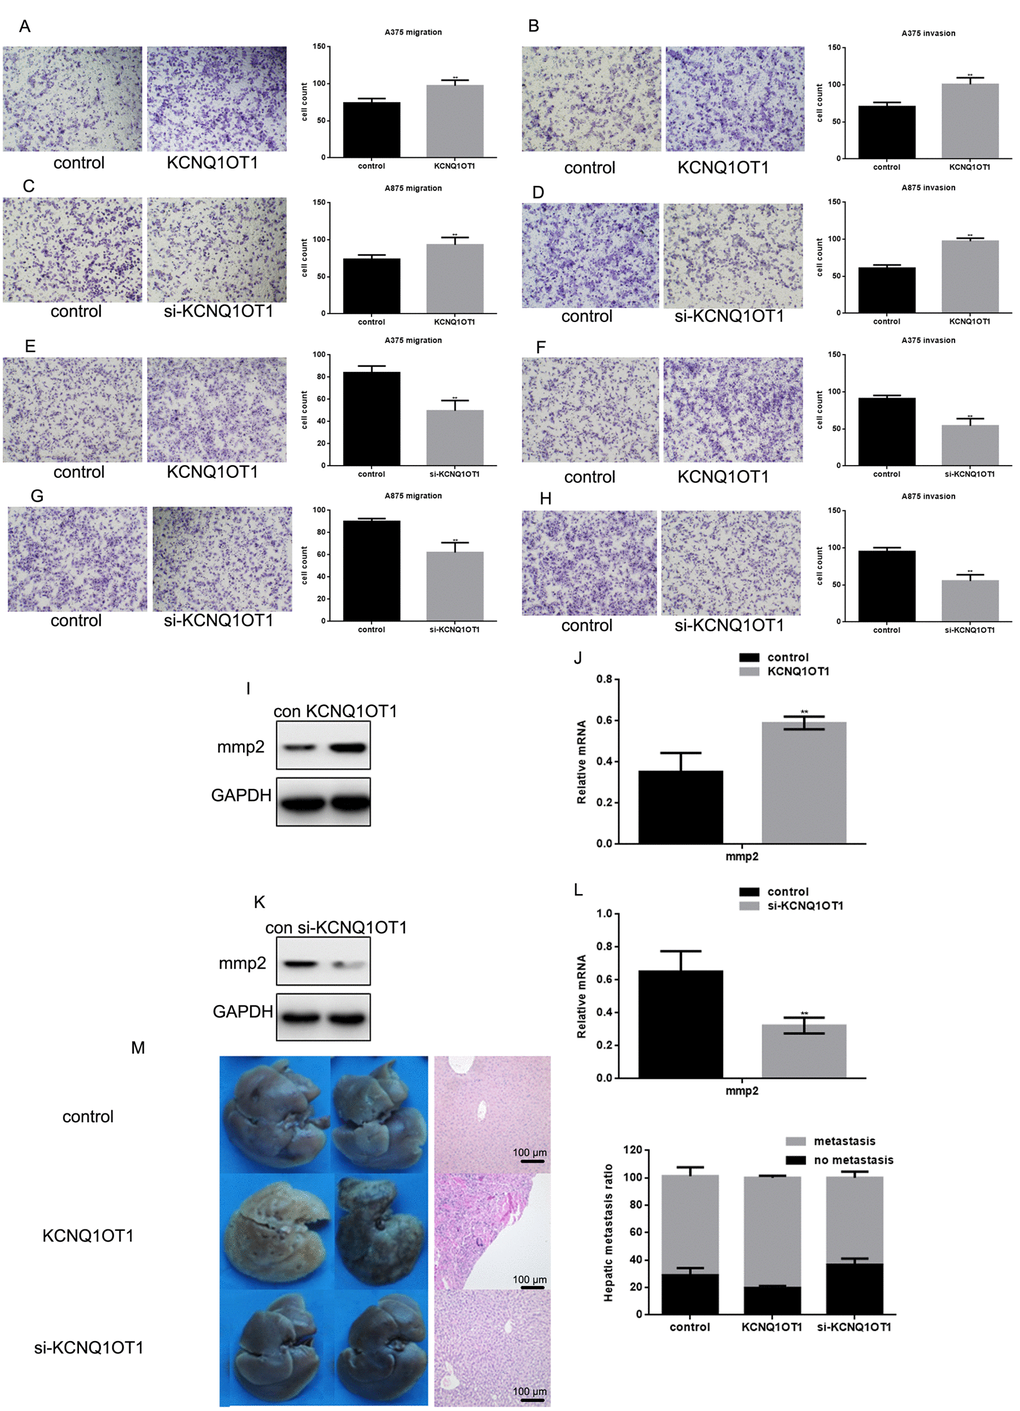 KCNQ1OT1 promotes melanoma cell metastasis. (A, B) After transfecting KCNQ1OT1/control in A375 cells and (E, F) A875 cells, transwell assays with or without matrigel were performed. Cells were counted and results represent the mean ± SD of three experiments. ** P C, D) After transfecting si-KCNQ1OT1 or control in A375 cells and (G, H) A875 cells, transwell assays with or without matrigel were performed. Cells were counted and results represent the mean ± SD of three experiments. ** P I, J) After transfecting KCNQ1OT1/control or (K, L) si-KCNQ1OT1 in A375 cells, MMP2 protein and mRNA level was detected by western blot and real time PCR. Data are shown as mean ± SEM. ** P M) 2×106 A375 cells with stable expression of vector (control), KCNQ1OT1, and si-KCNQ1OT1 were injected into nude mice via the tail vein. Livers were dissected and either macroscopically photographed (left) or stained with H&E (middle, Scale bar, 100μm). The right side is the HE staining results of the liver (right).